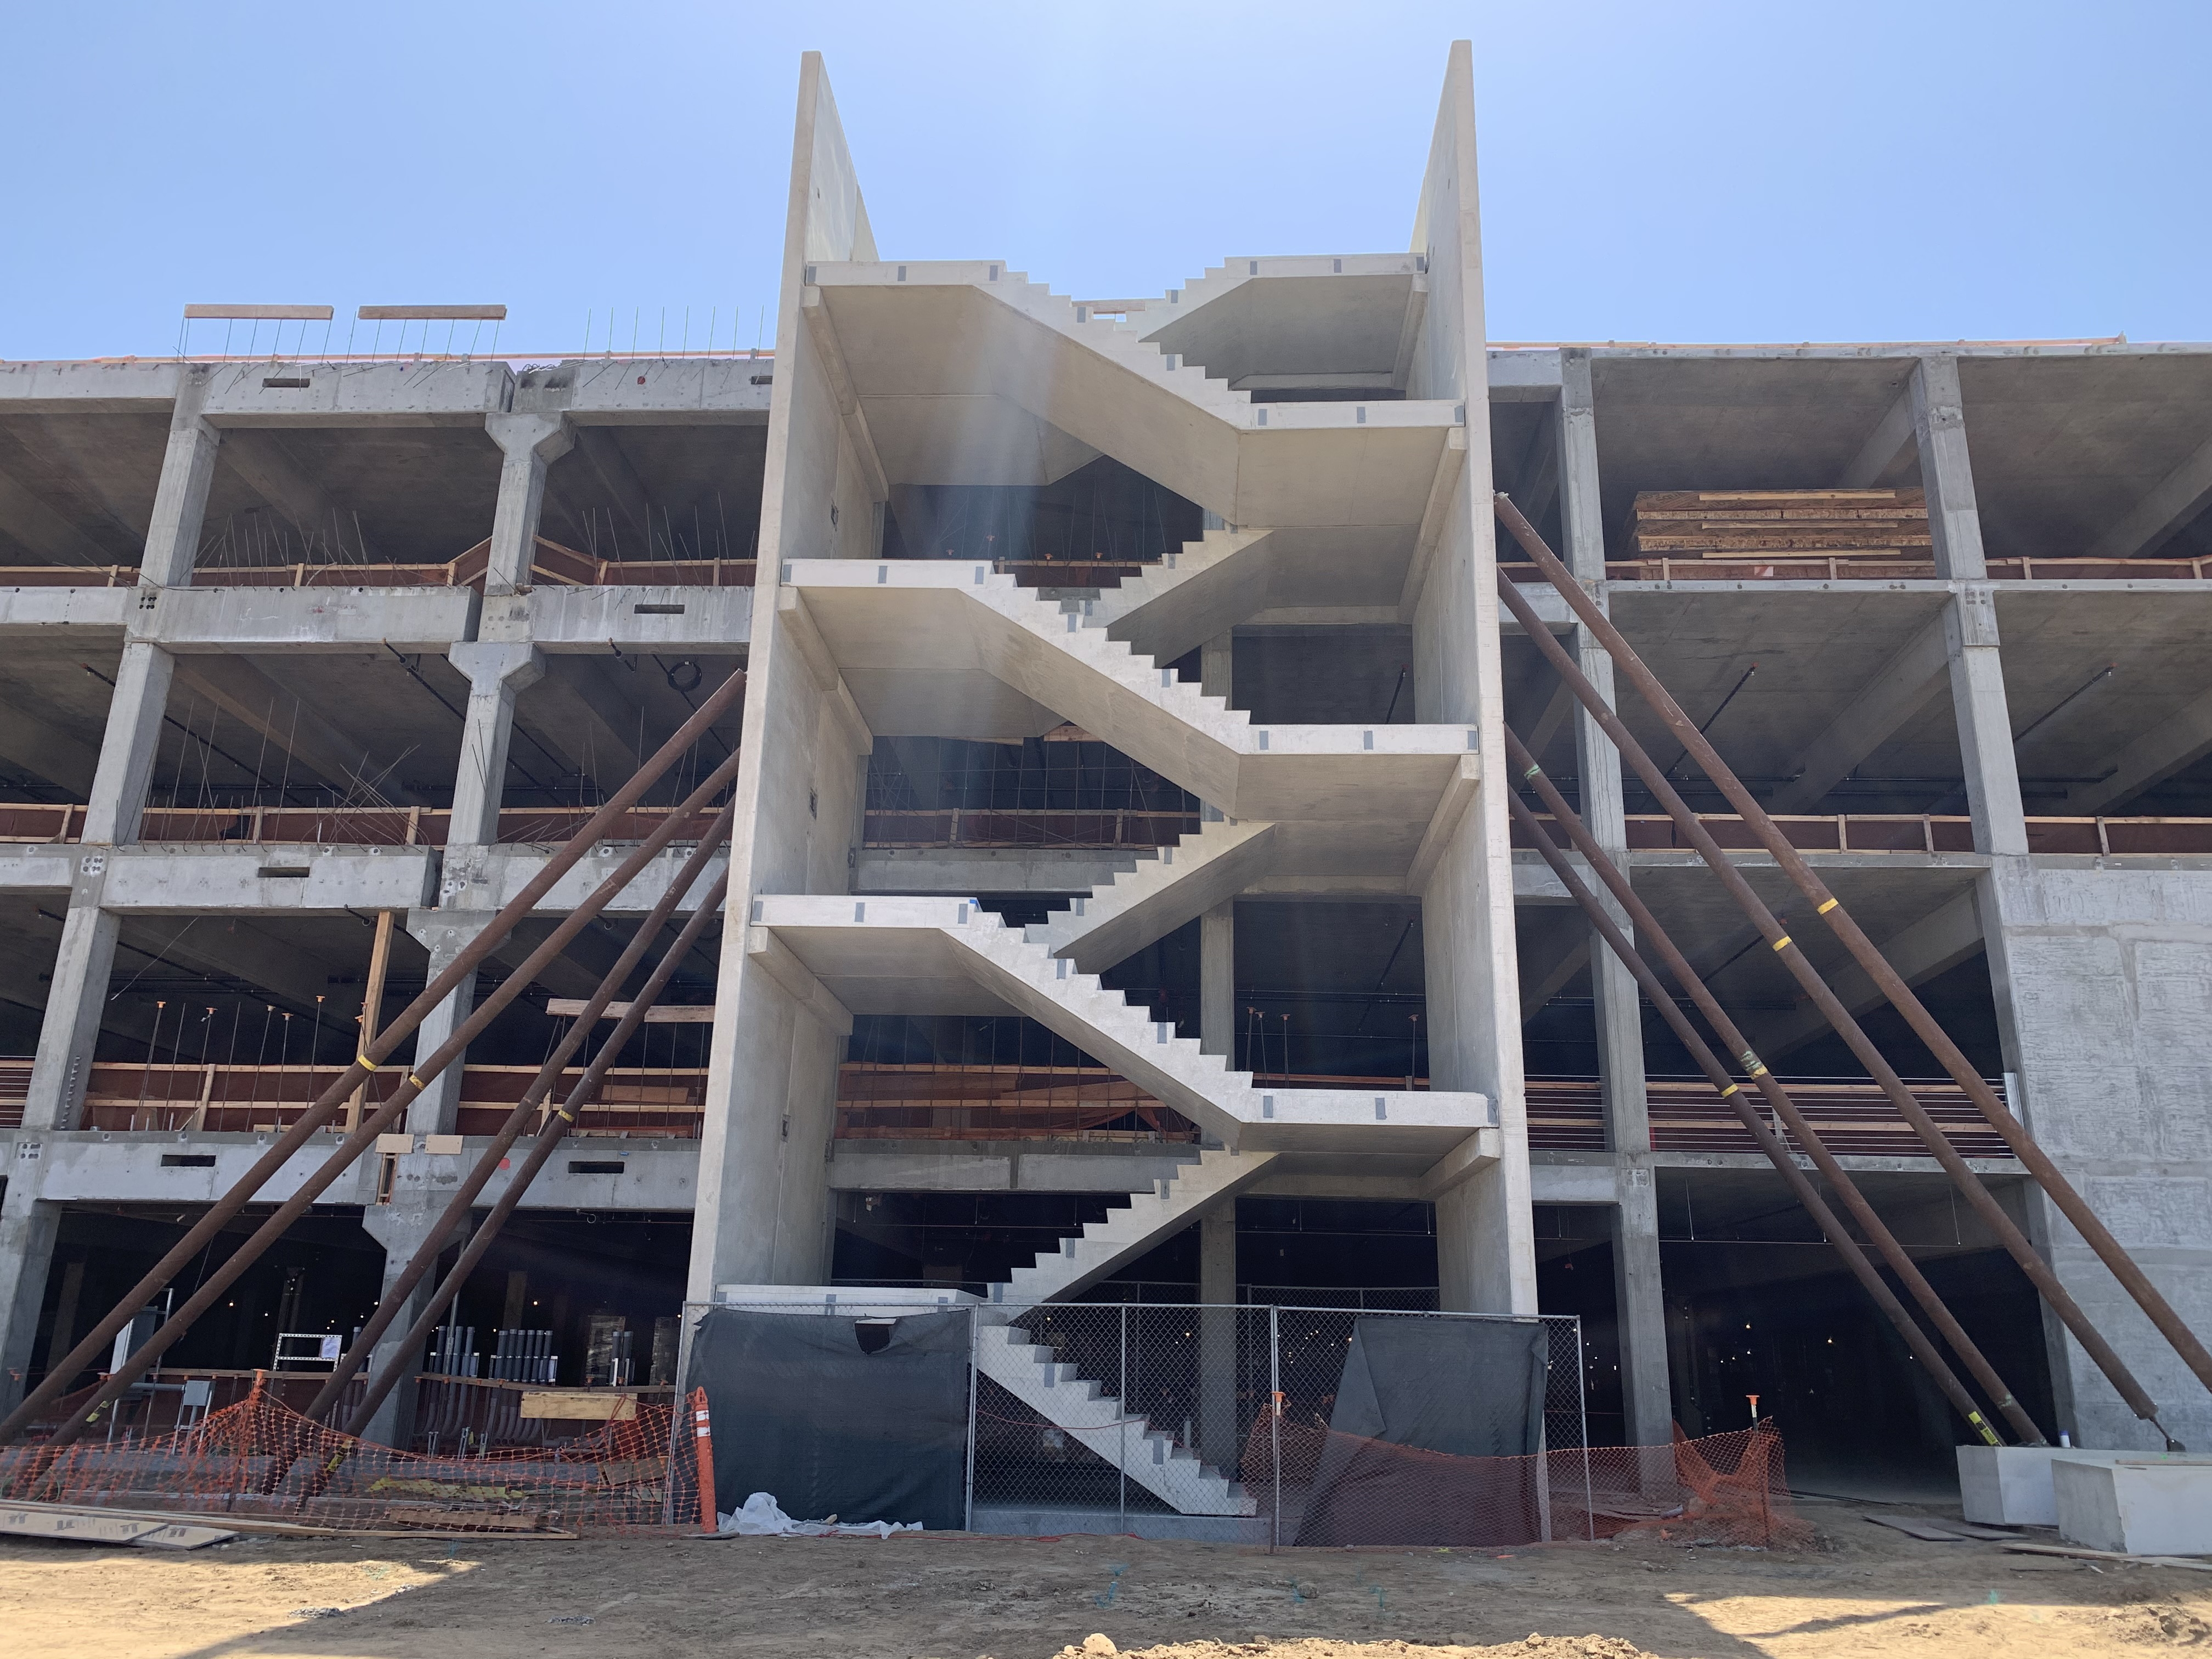 Precast stair installation at the Consolidated Rent-A-Car facility’s Ready Return building.